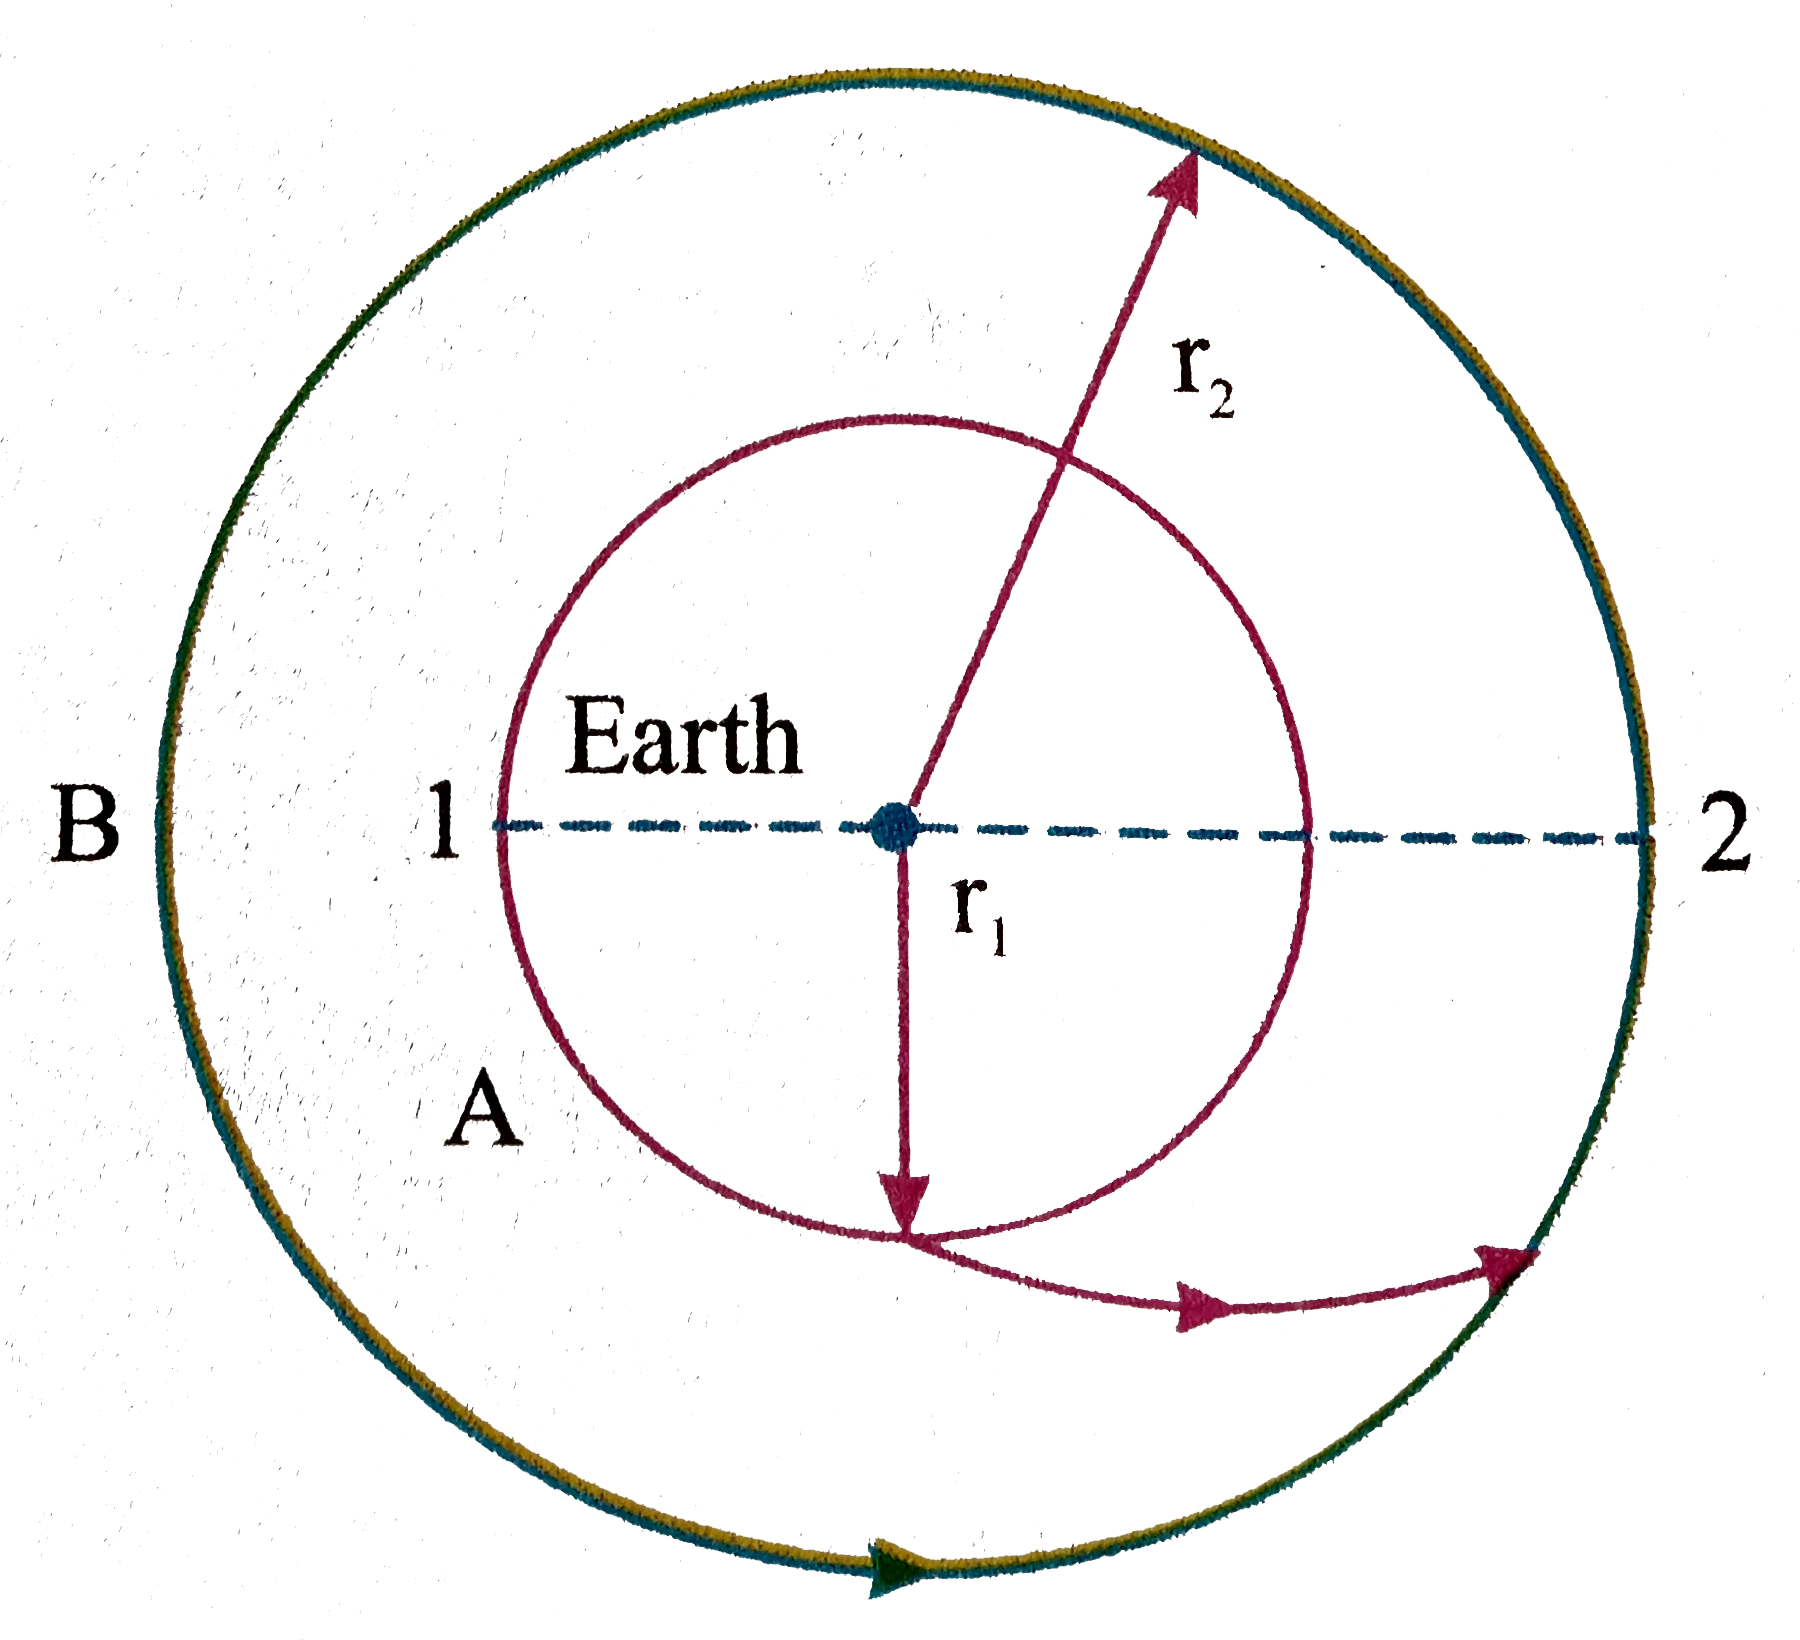 Two satellites A and B are revolving around the earth in circular orbits of radius r(1) and r(2) respectively with r(1)ltr(2). Plane of motion of the two are same. At position 1, A is given an impulse in the direction of velocity by firing a rocket so that it follows an elliptical path to meet B at position 2 as shown. focal lengths of the elliptical path are r(1) and r(2) respectively. at position 2, A is given another impulse so that velocities of A and B at 2 become equal and the two move together. for any elliptical path of the satellite time period of revolution is given Kepler's planetry law as T^(2)alphar^(3) where a is semi-major axis of the ellipse which is (r(1)+r(2))/2 in this case. also angular momentum of any satellite revolving around the earth will remain a constant about earth's centre as force of gravity on the satellite which keeps it in elliptical path is given its position vector relative to the earth centre.   If r(2)=3r(1) and time period of revolution for B be T then time taken by A in moving from position 1 to position 2 is